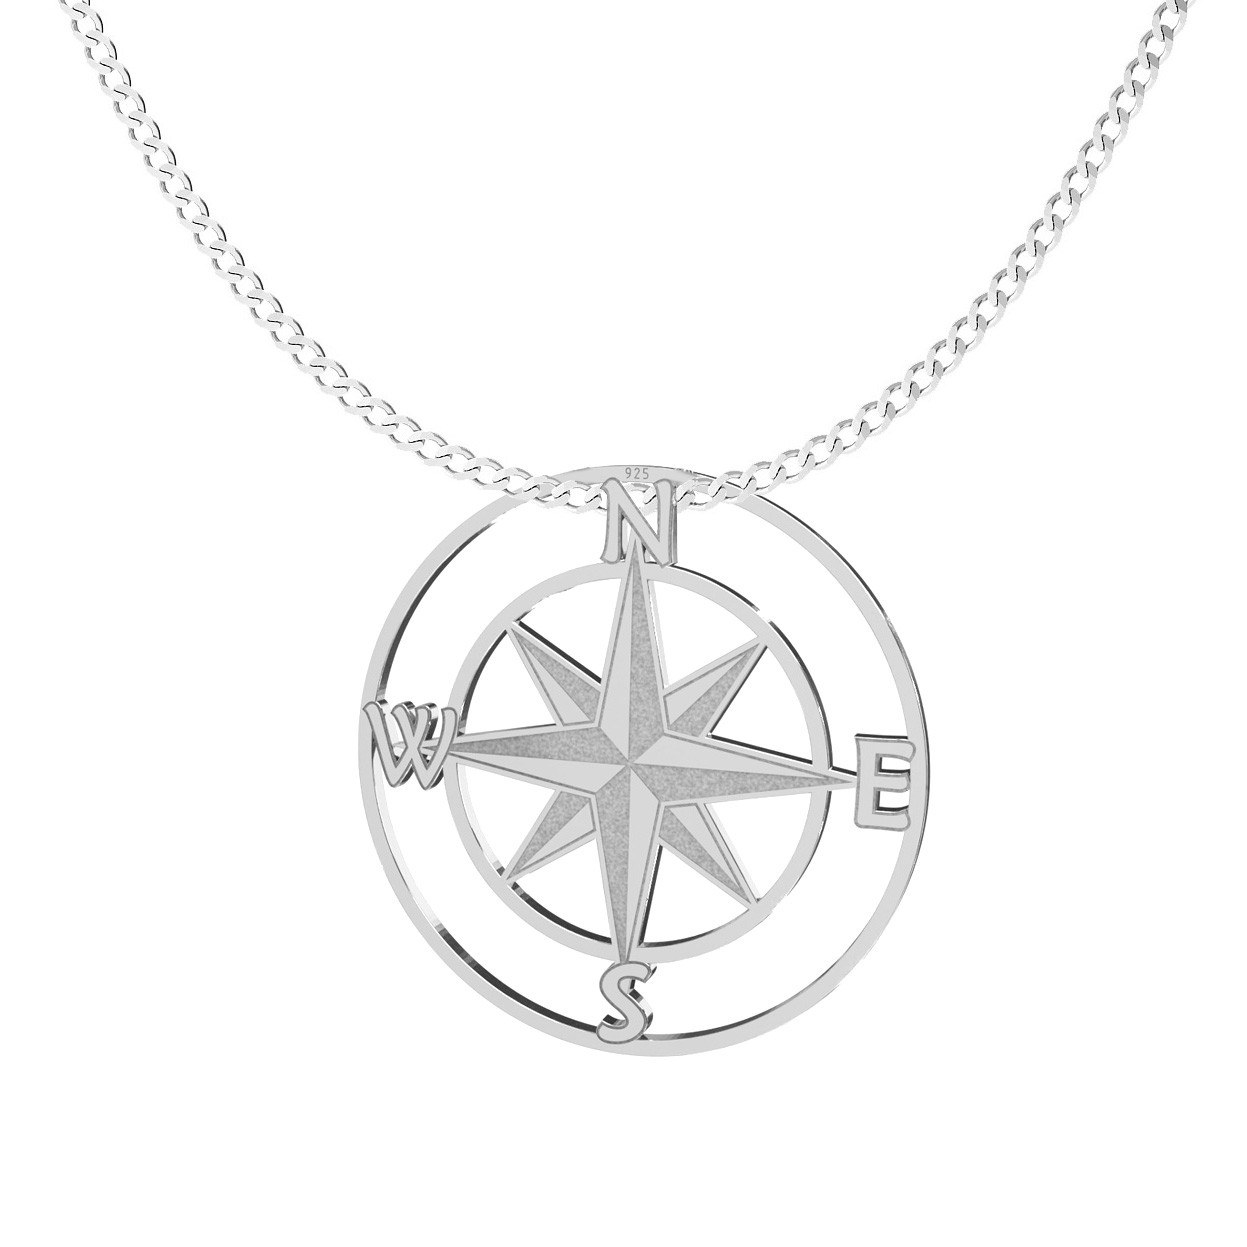 Wind rose necklace, sterling silver 925